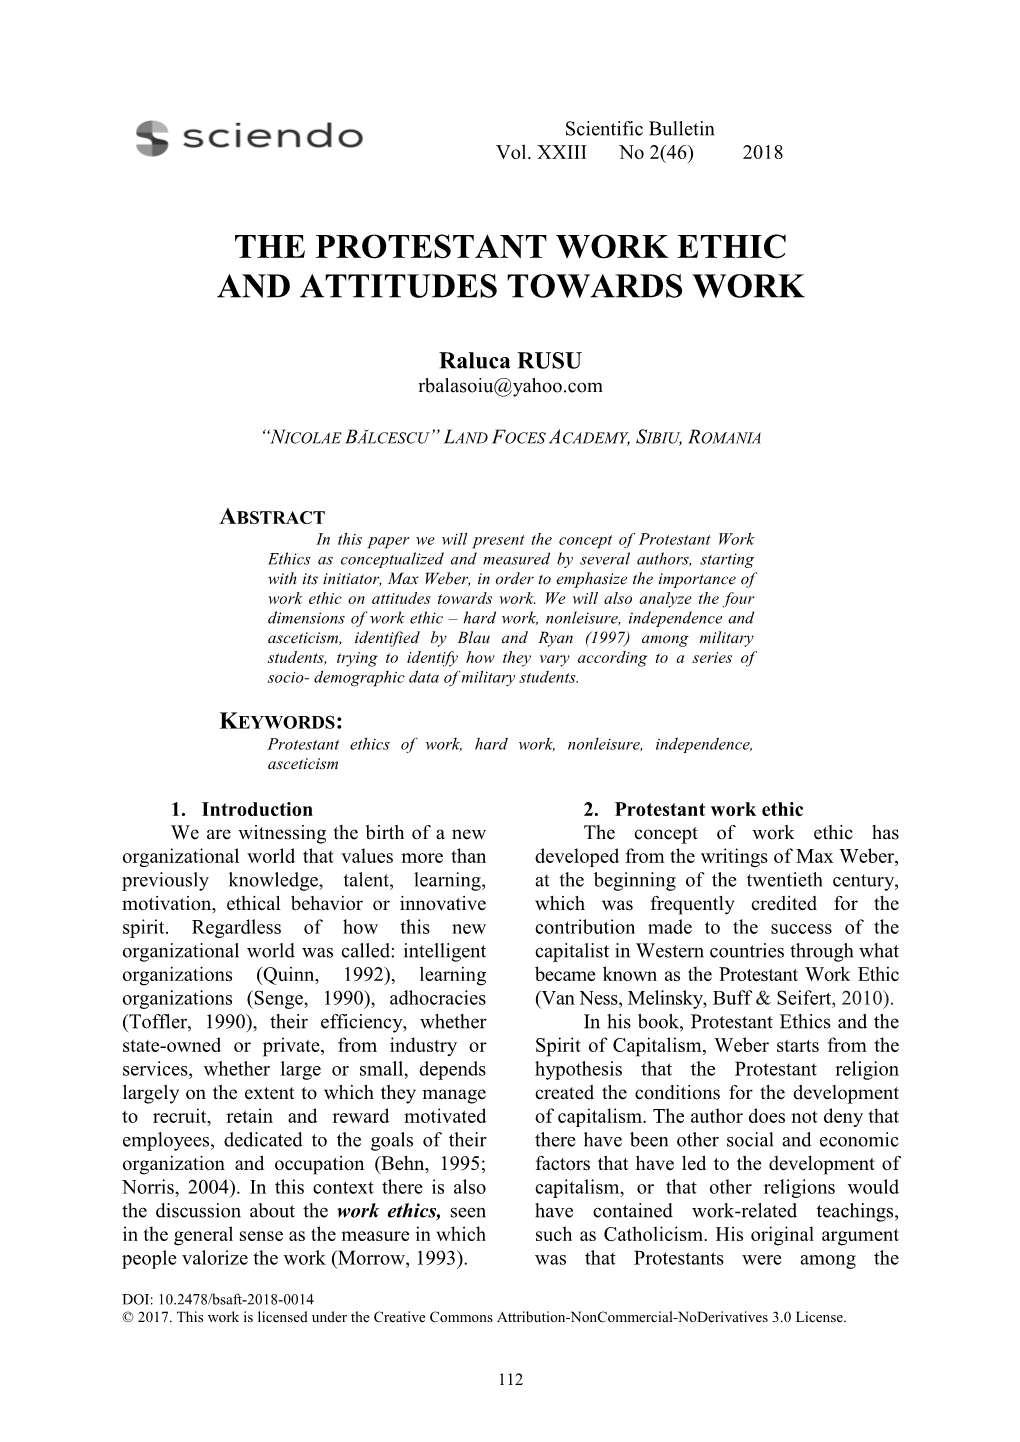 The Protestant Work Ethic and Attitudes Towards Work